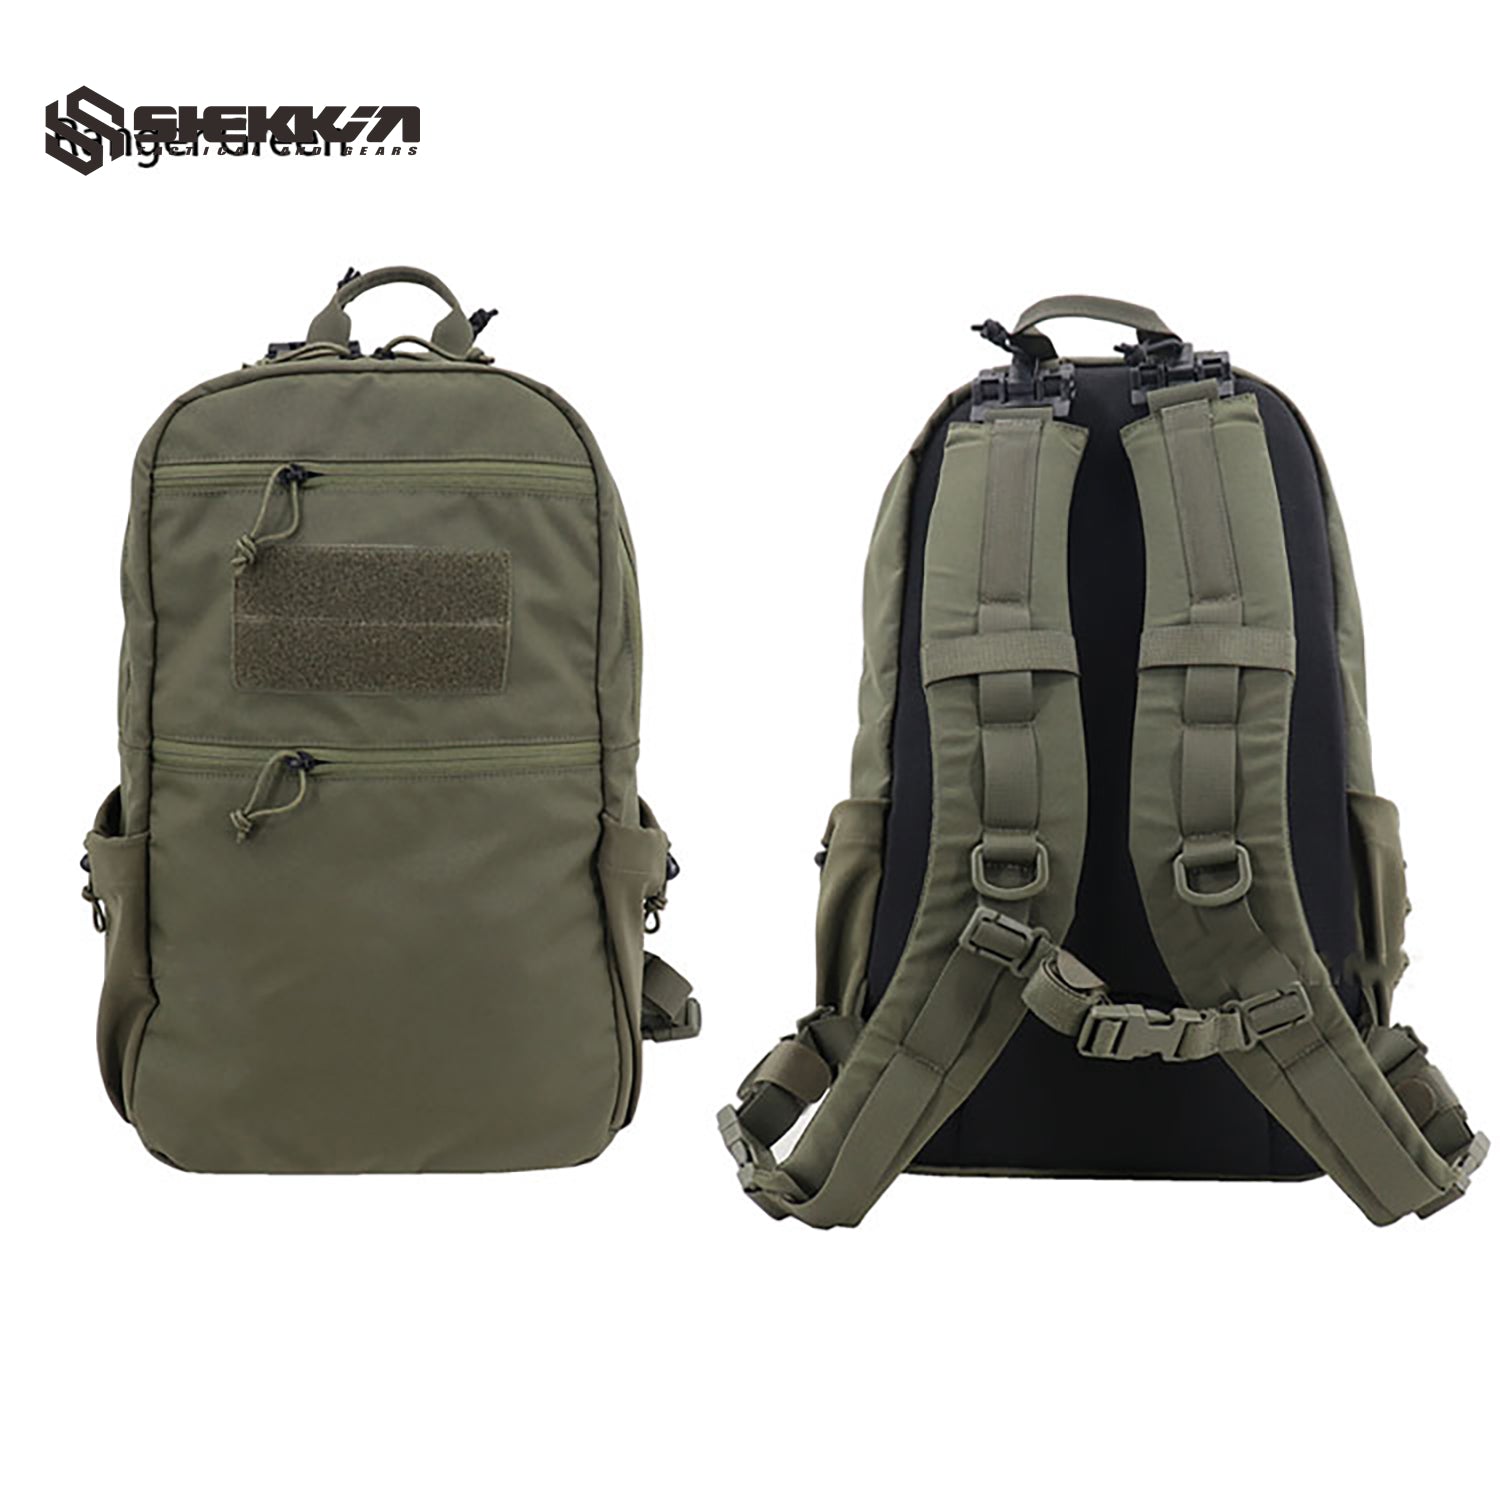 8005A style 14L day pack